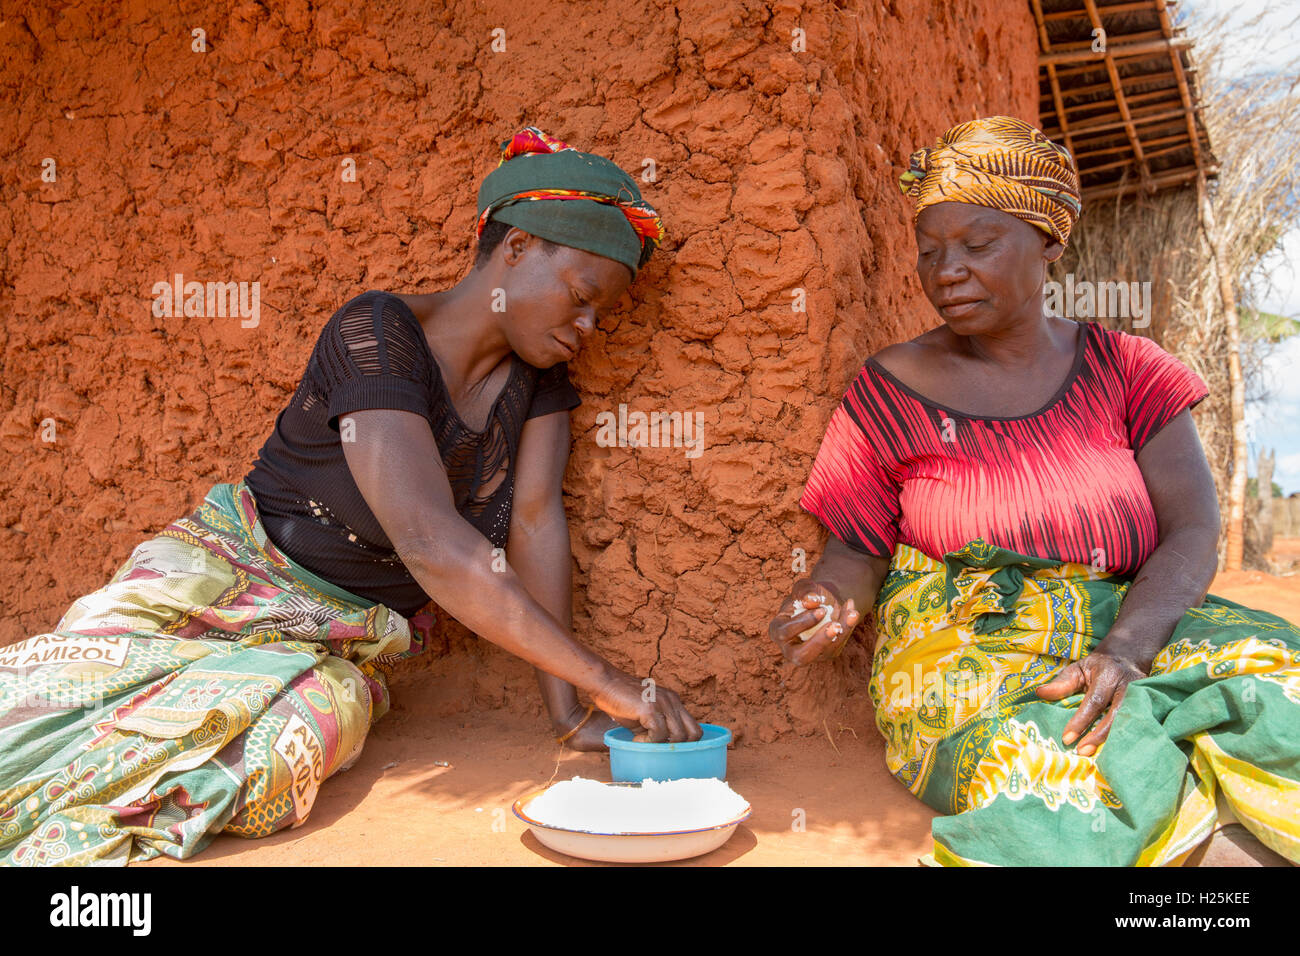 Namina village, Nampula Province, Mozambique, August 2015:  Maria Albino, 42, at home. She is blind with bilateral cataracts and needs help to do most tasks. Her sister Louisa makes a mid-day meal.  Photo by Mike Goldwater Stock Photo